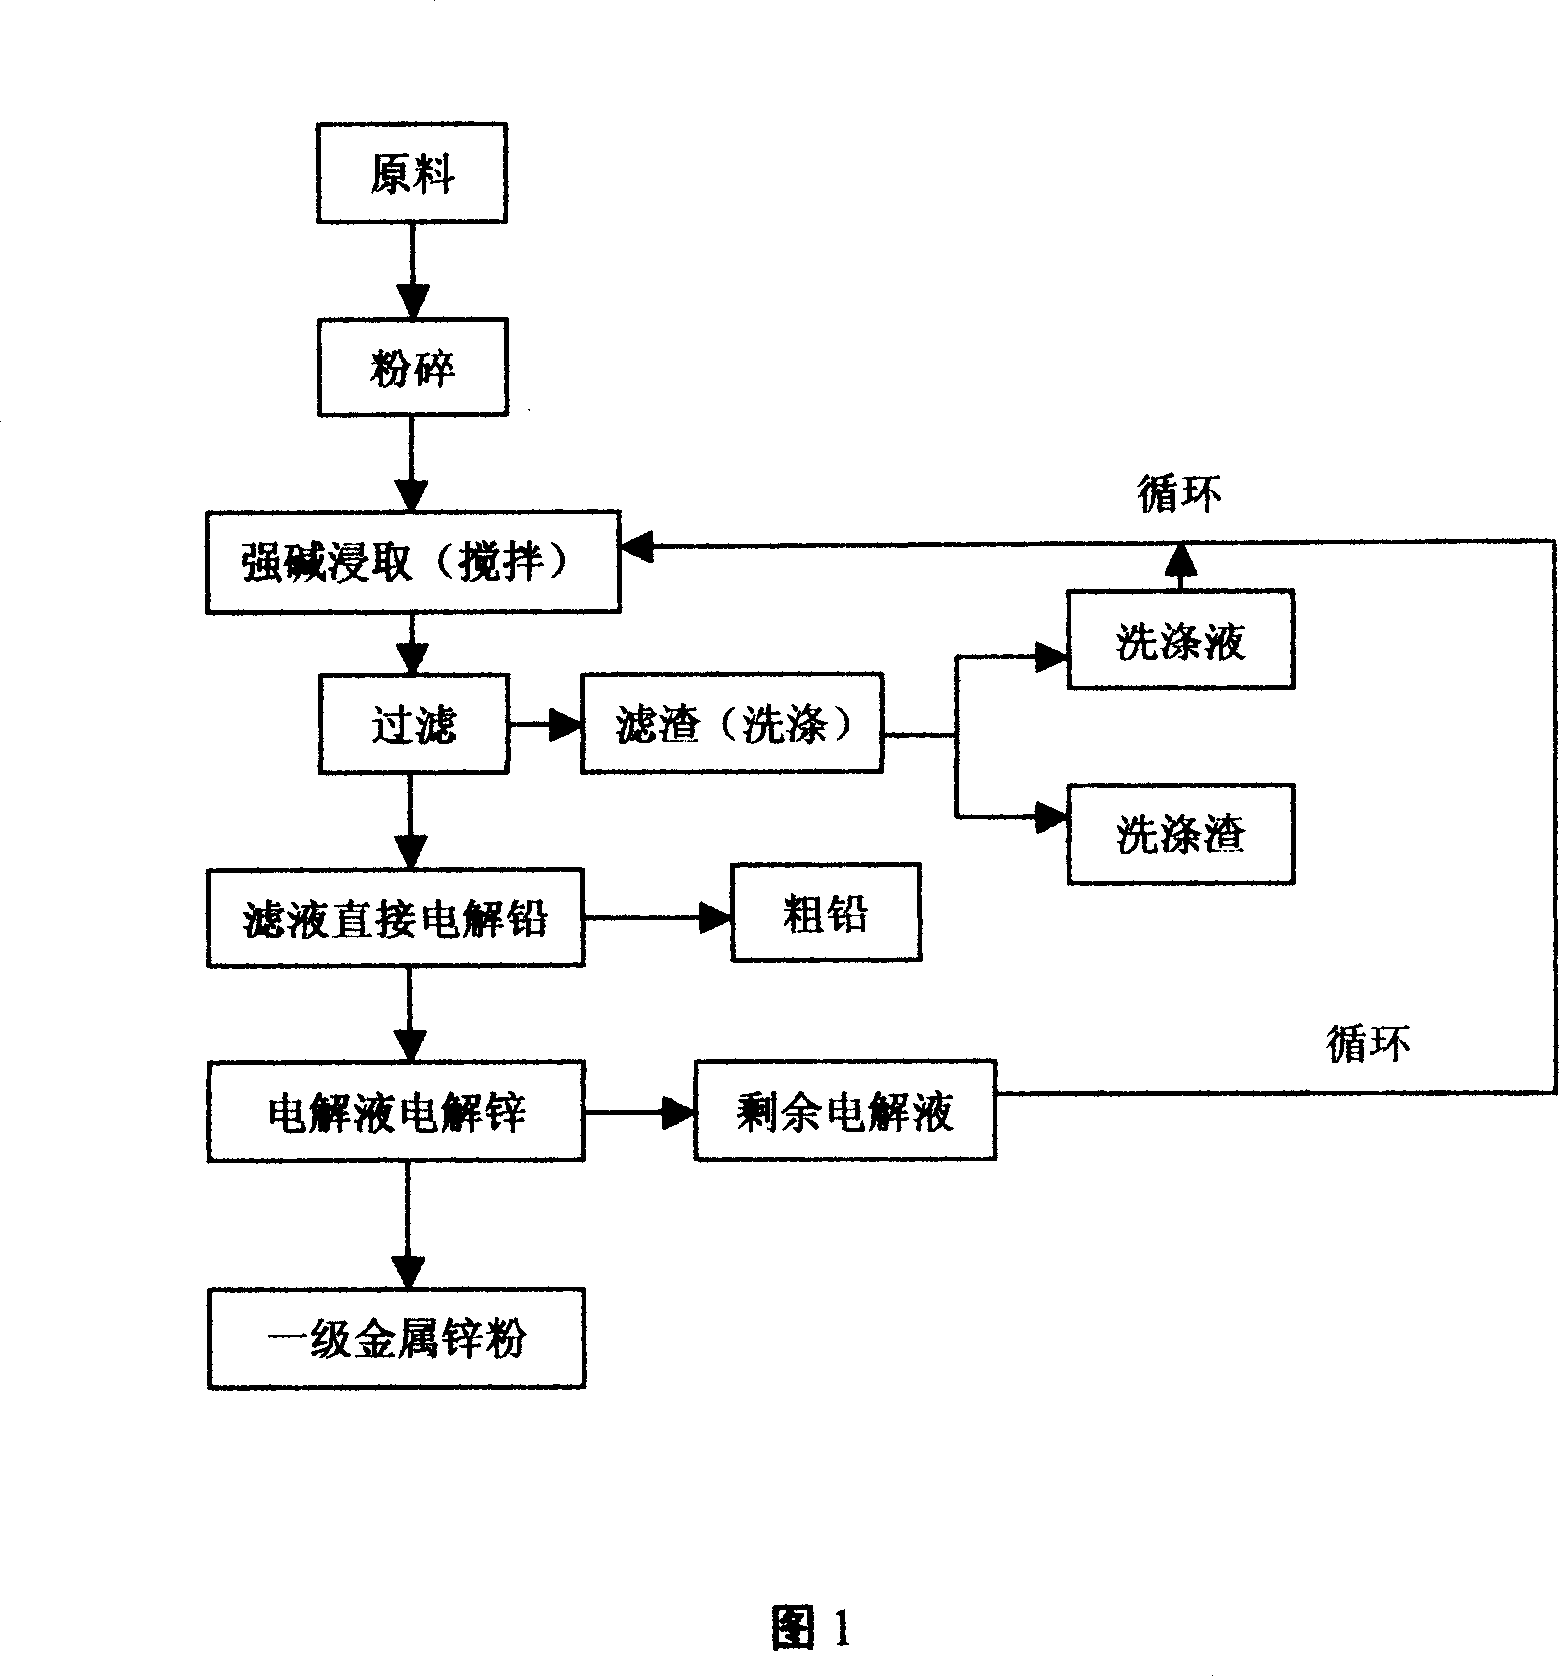 Method for producing metallic lead and zinc by using lead-zinc containing waste slag or lead-zinc monoxide mine